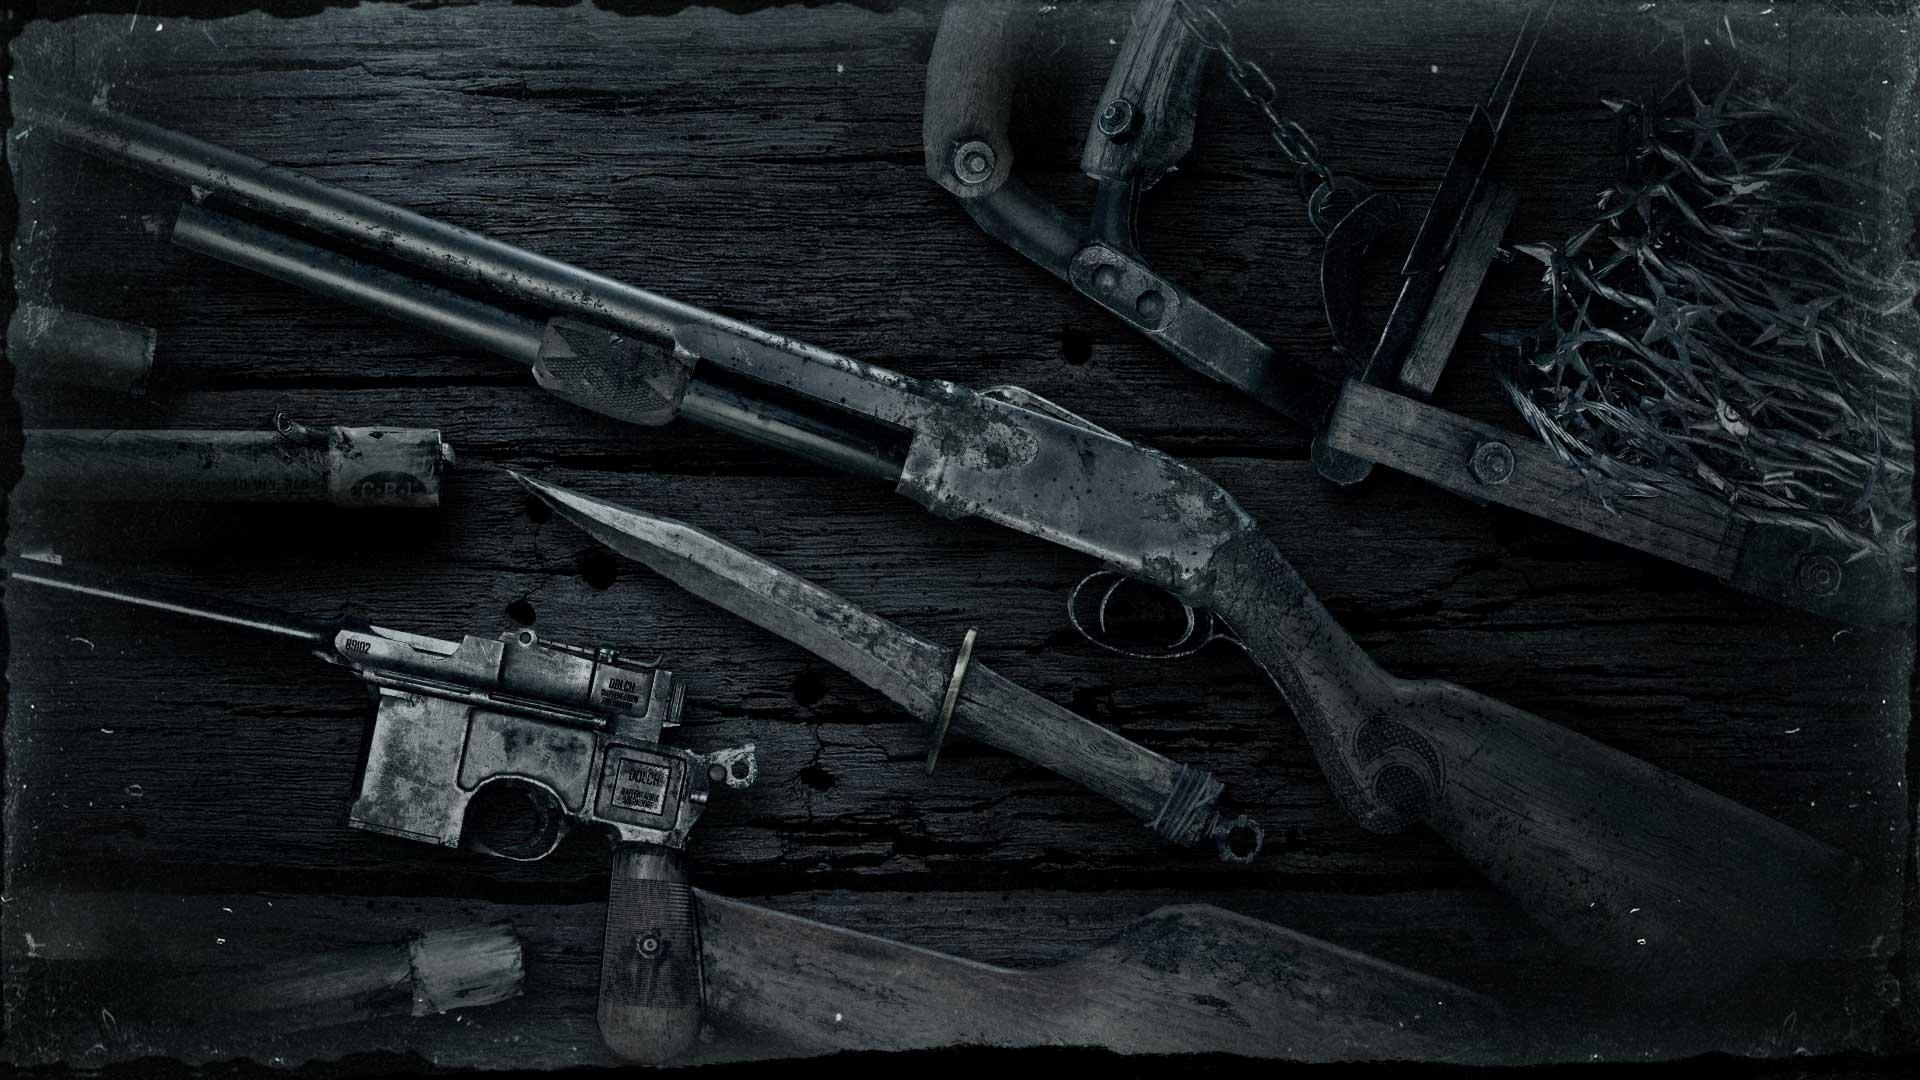 Hunt Showdown on Twitter Another day another wallpaper  What kind of  wallpaper would you want to see in the future 2k httpstcohbXVrOtPaR  Ultrawide httpstcoxHryY1mufG httpstcovuDjFwySGJ  X